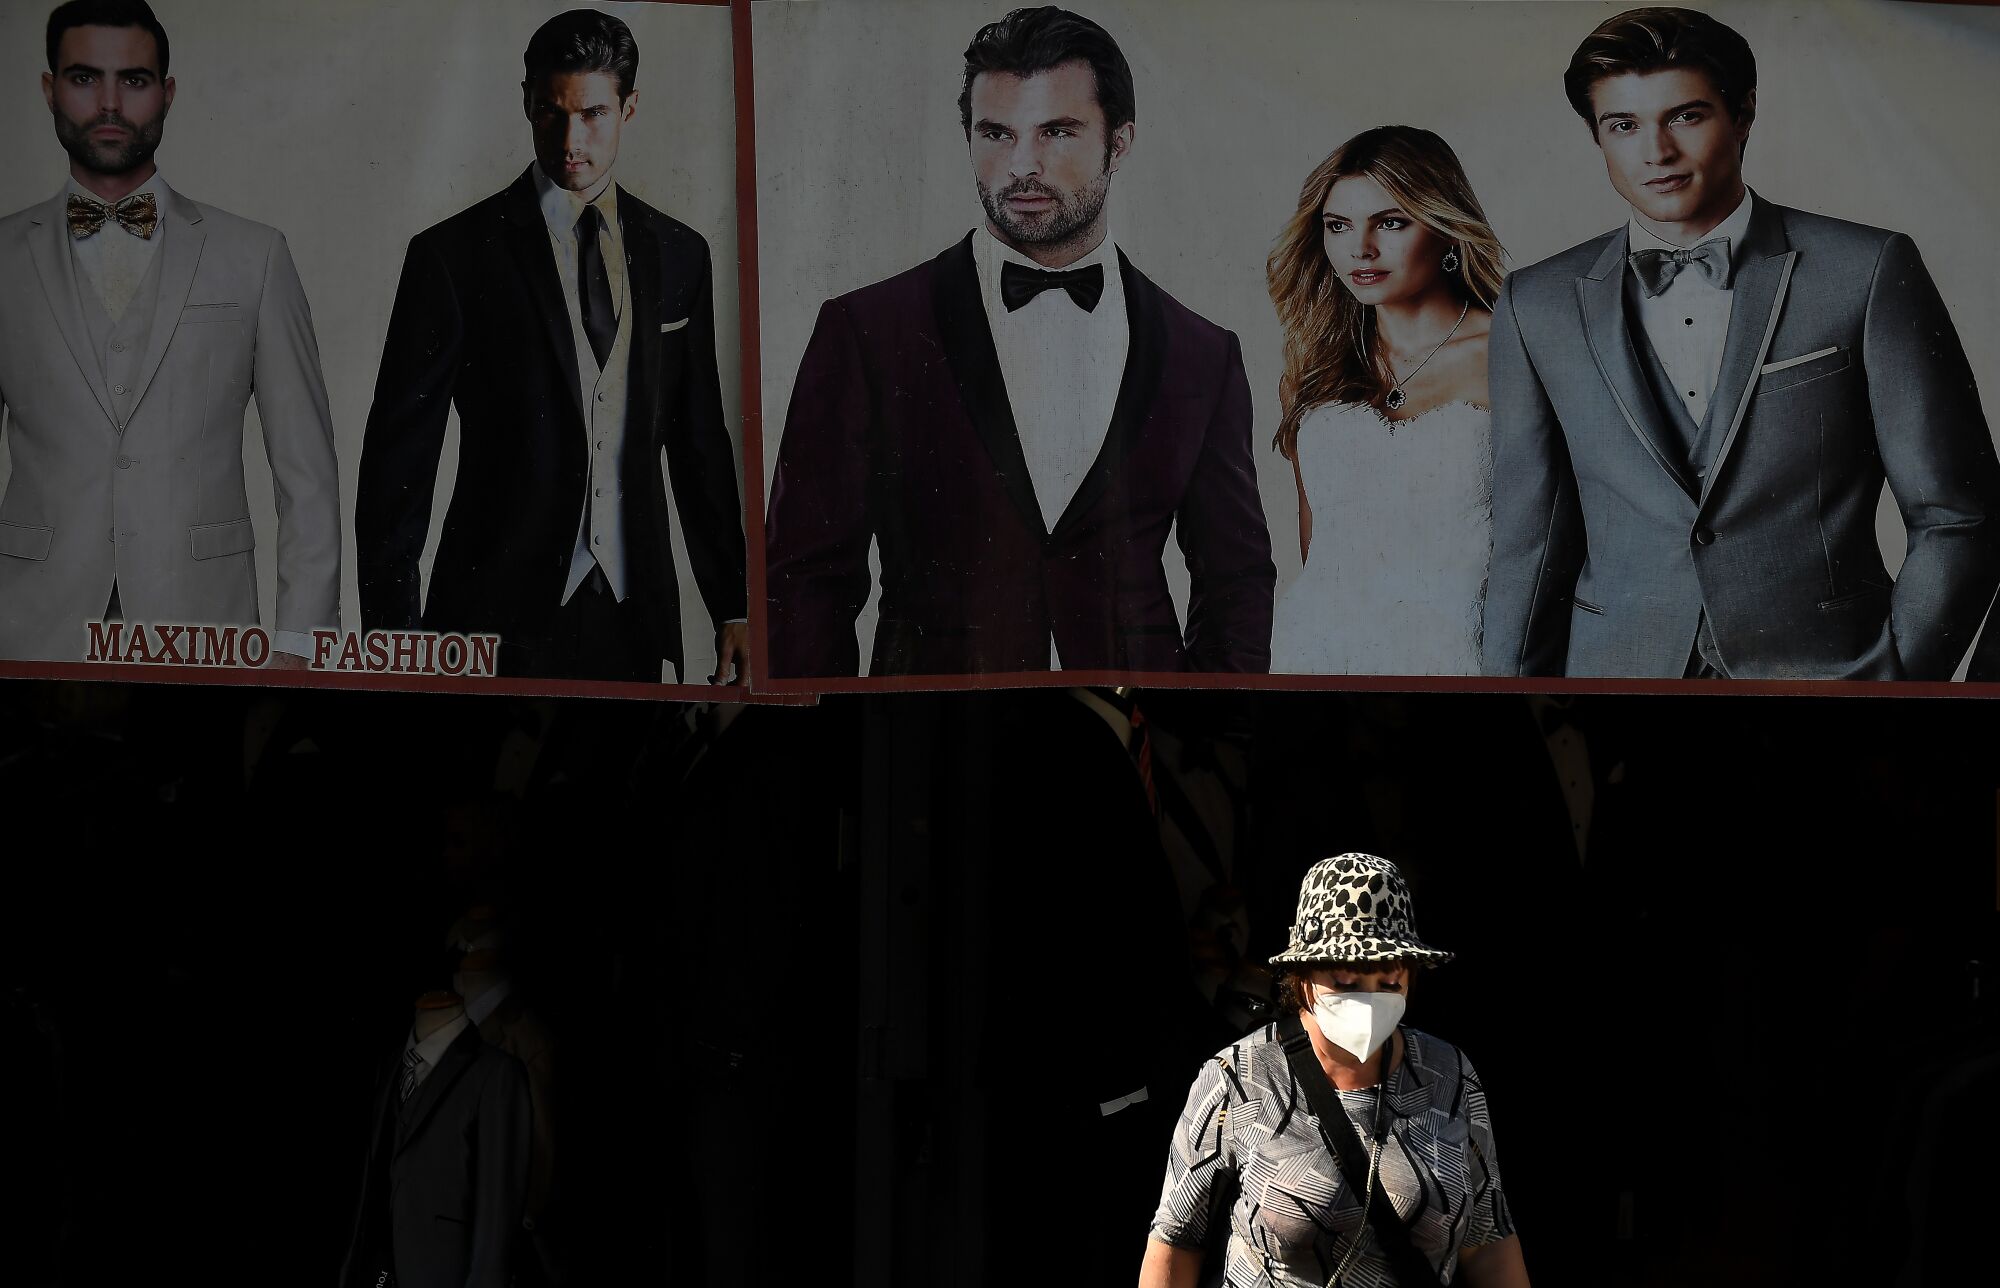 An advertisement of people in formal wear provides a backdrop for a masked pedestrian.